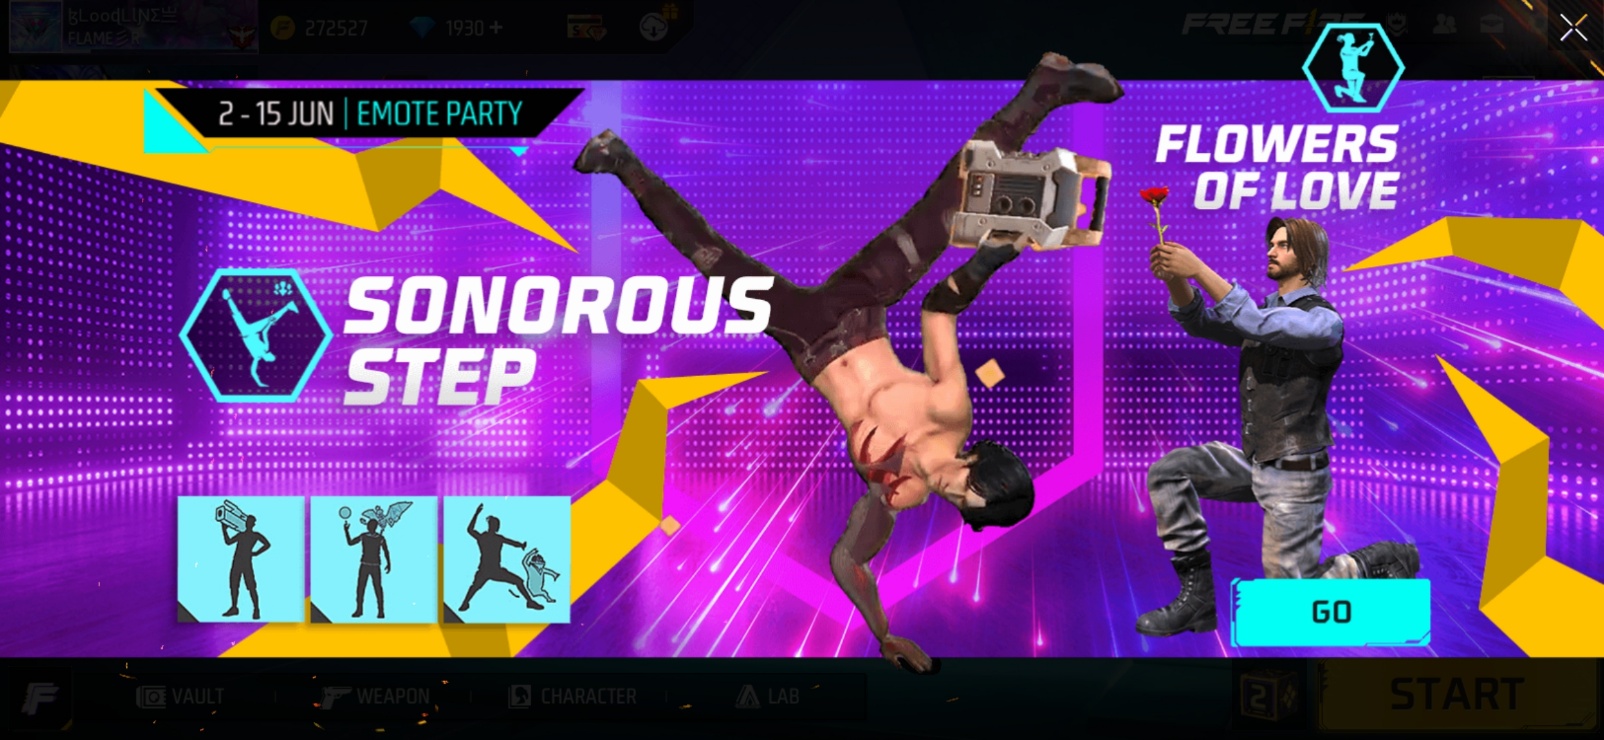 How To Get The Sonorous Step Emote In Free Fire